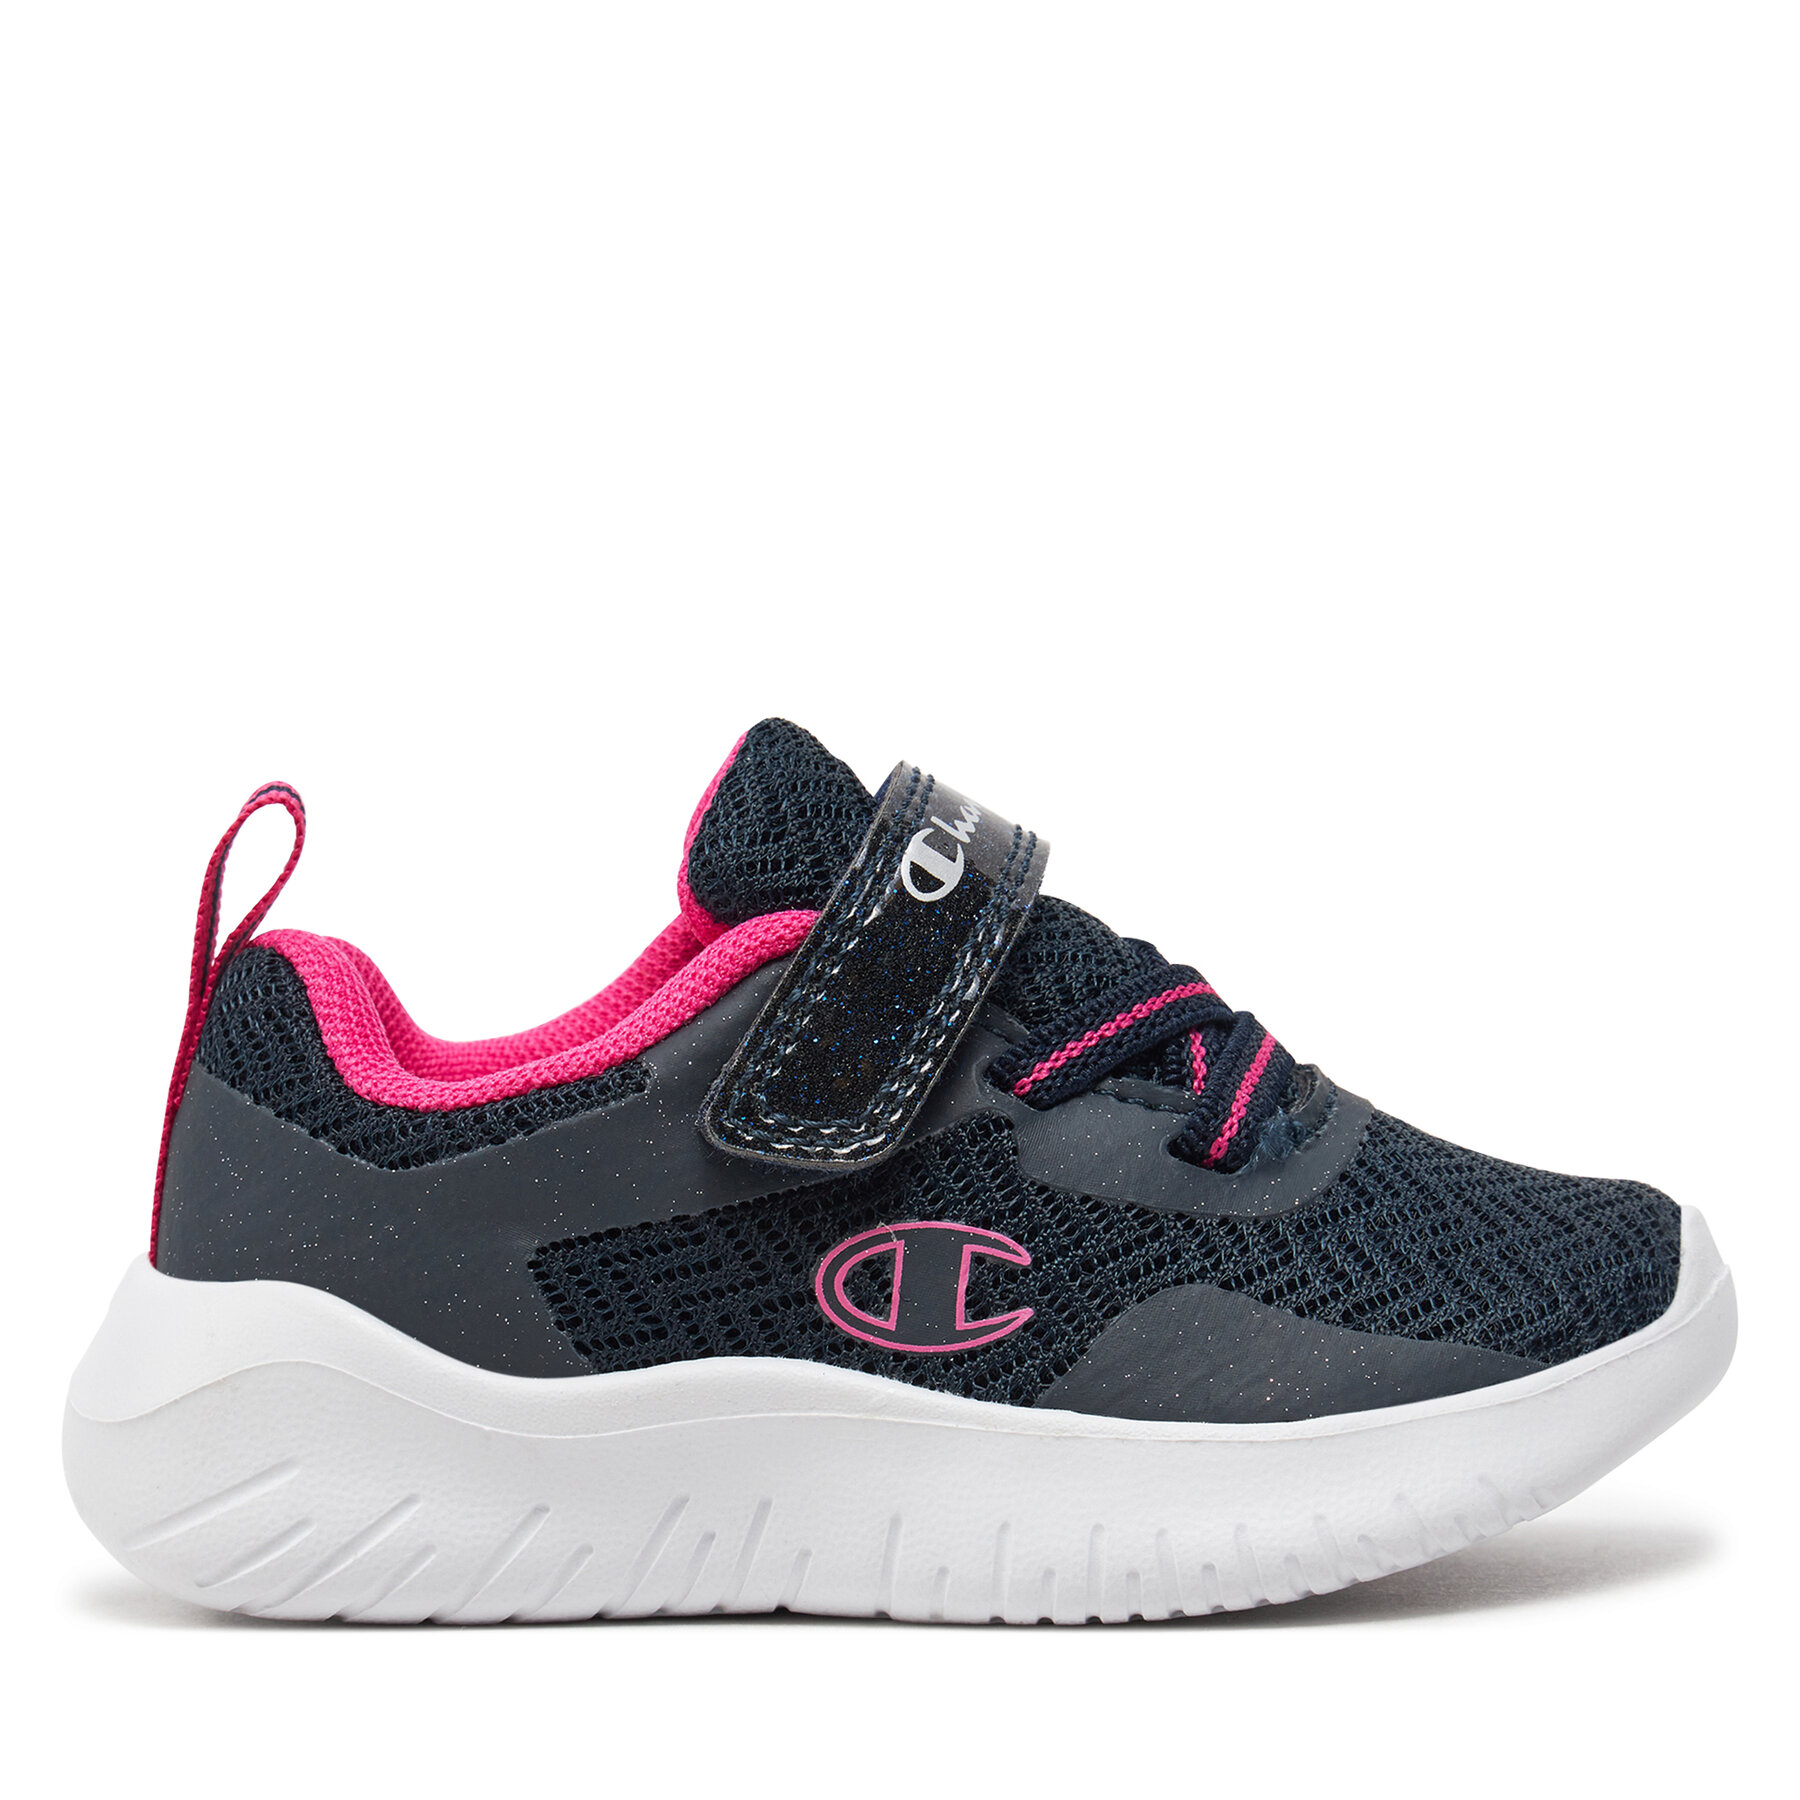 Sneakers Champion Softy Evolve G Td Low Cut Shoe S32531-CHA-BS501 Nny/Fucsia von Champion